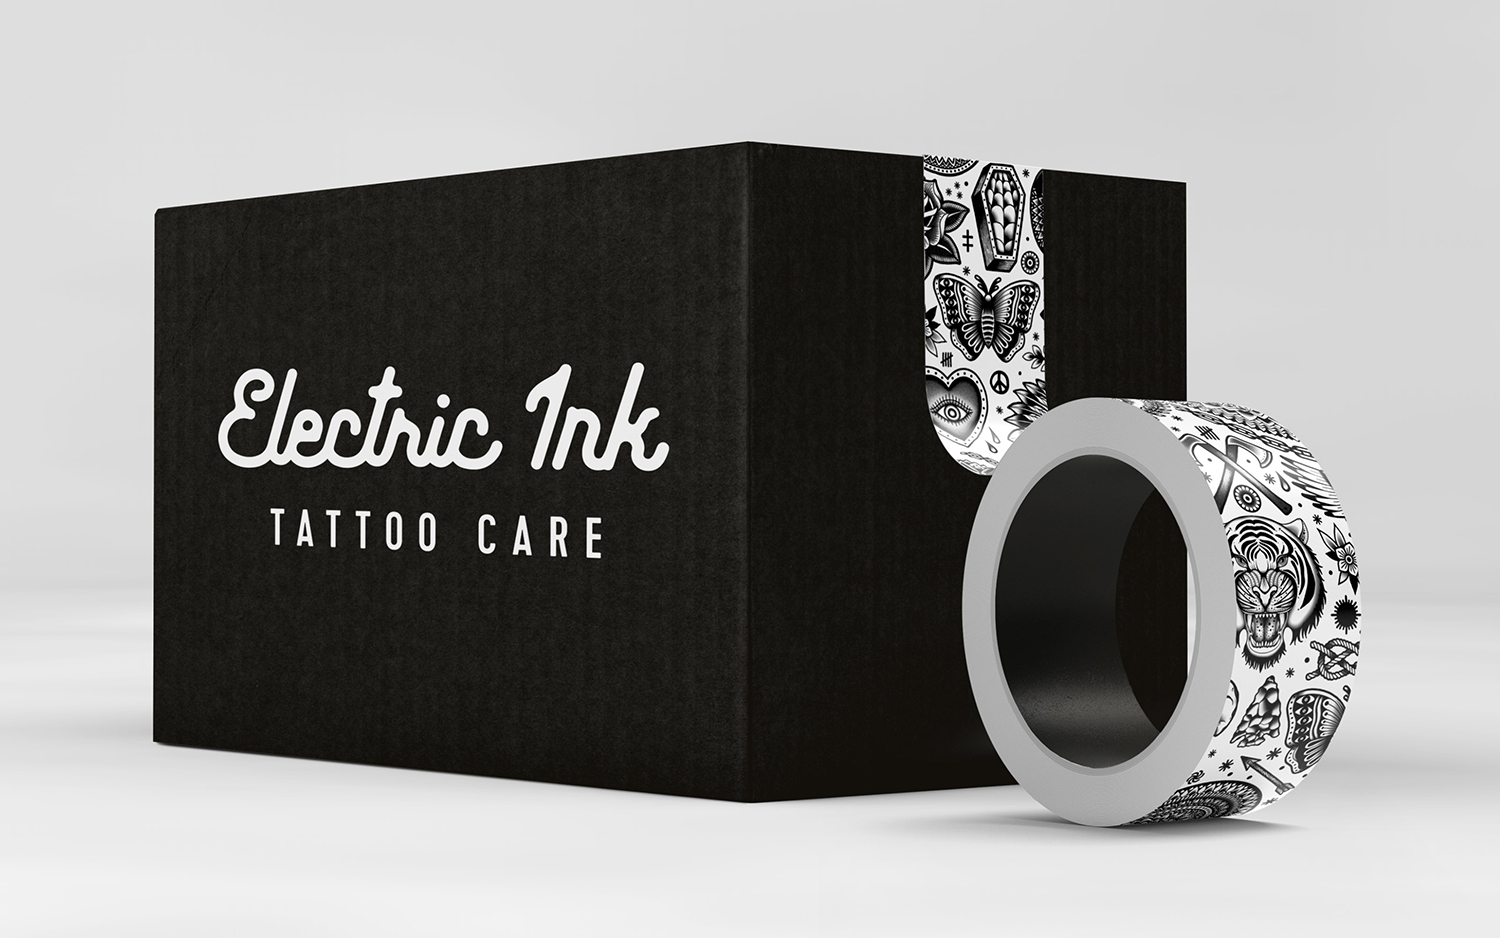 Brand identity and package design for tattoo care range Electric Ink by Leeds-based design studio Robot Food.